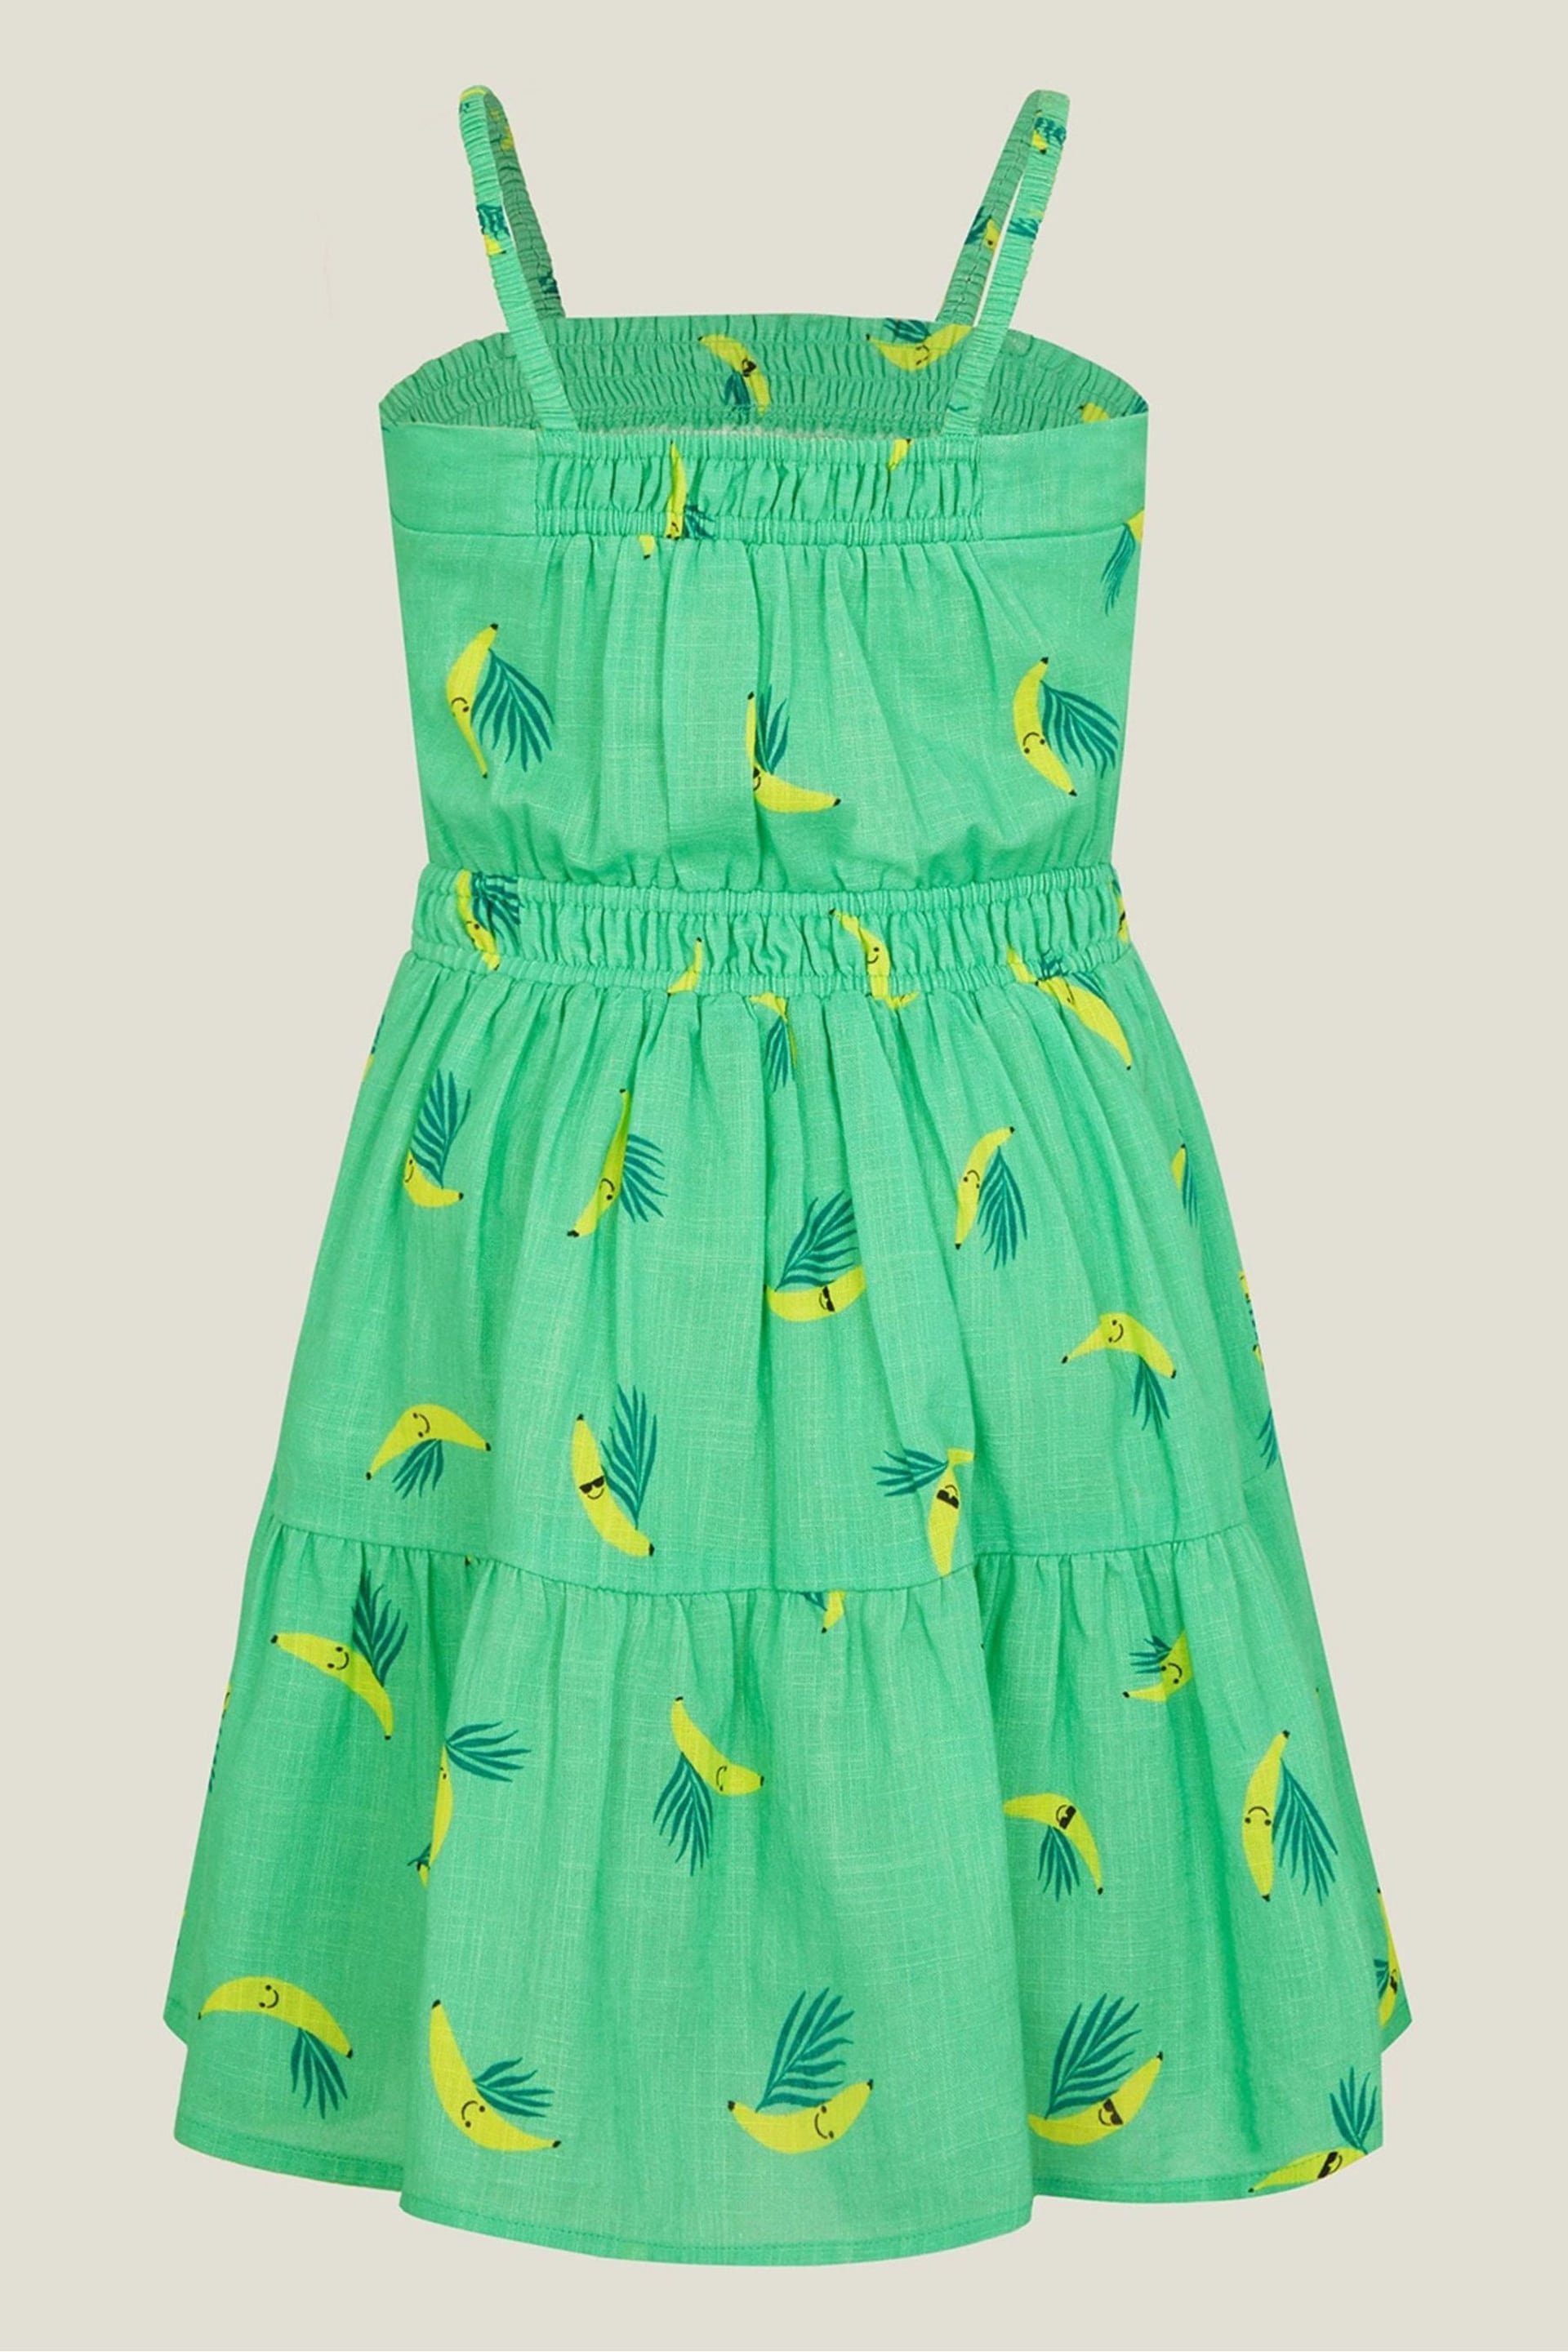 Angels By Accessorize Girls Green Banana Dress - Image 3 of 3